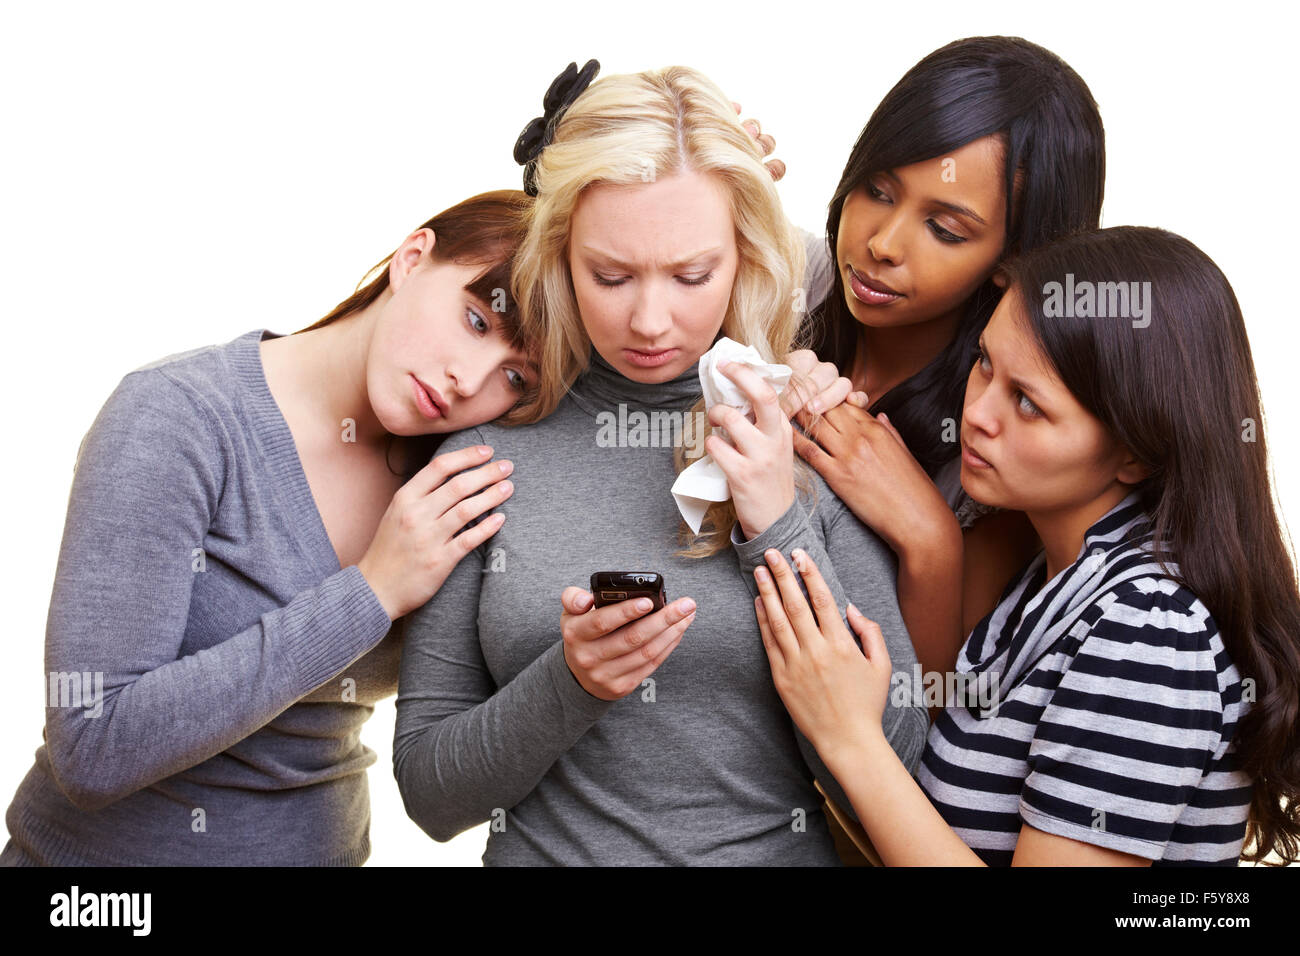 Four young women centered around a cell phone Stock Photo